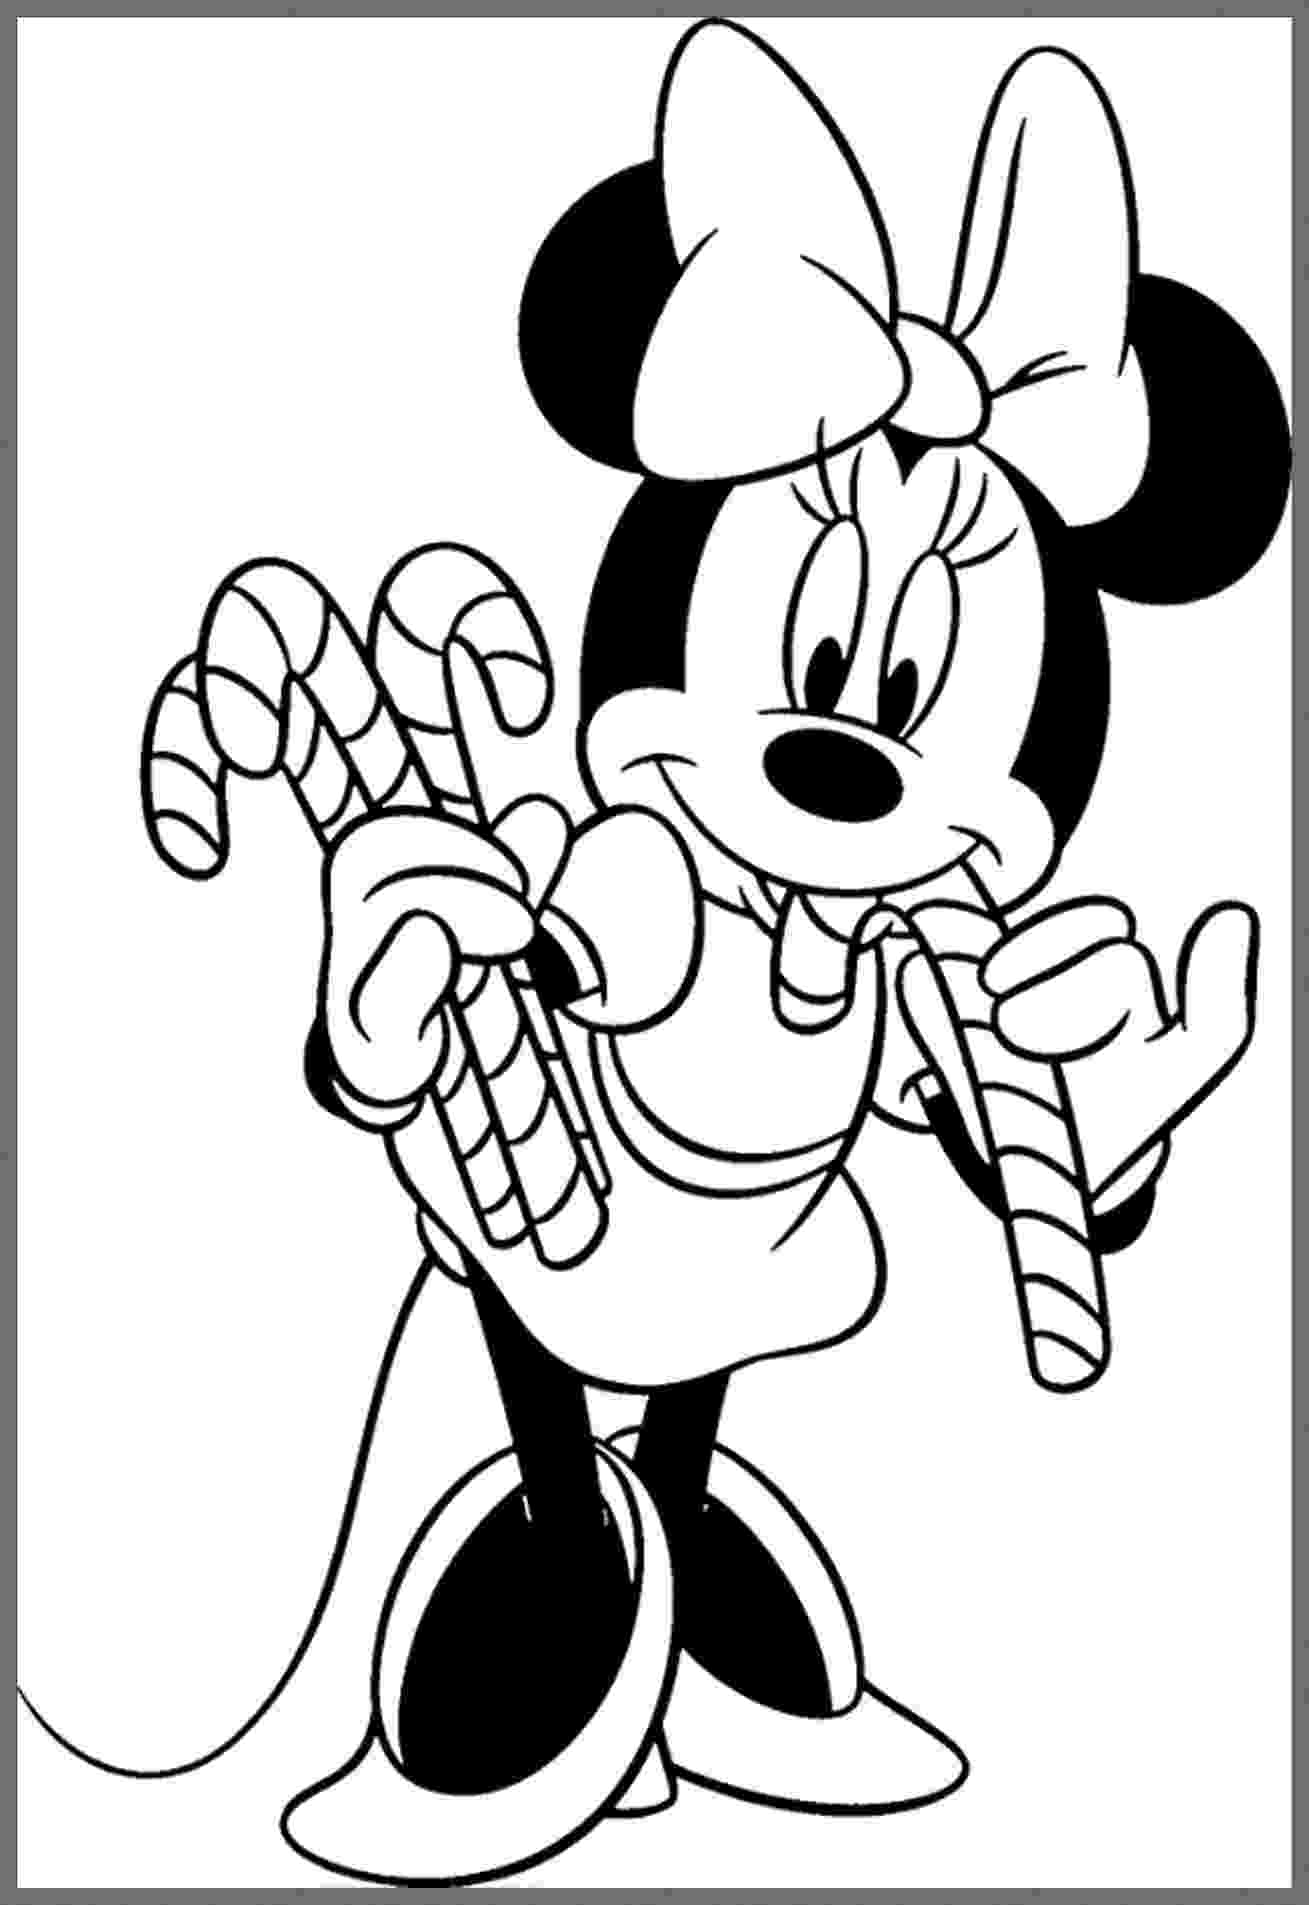 chirstmas coloring pages mickey mouse christmas coloring pages best coloring coloring chirstmas pages 